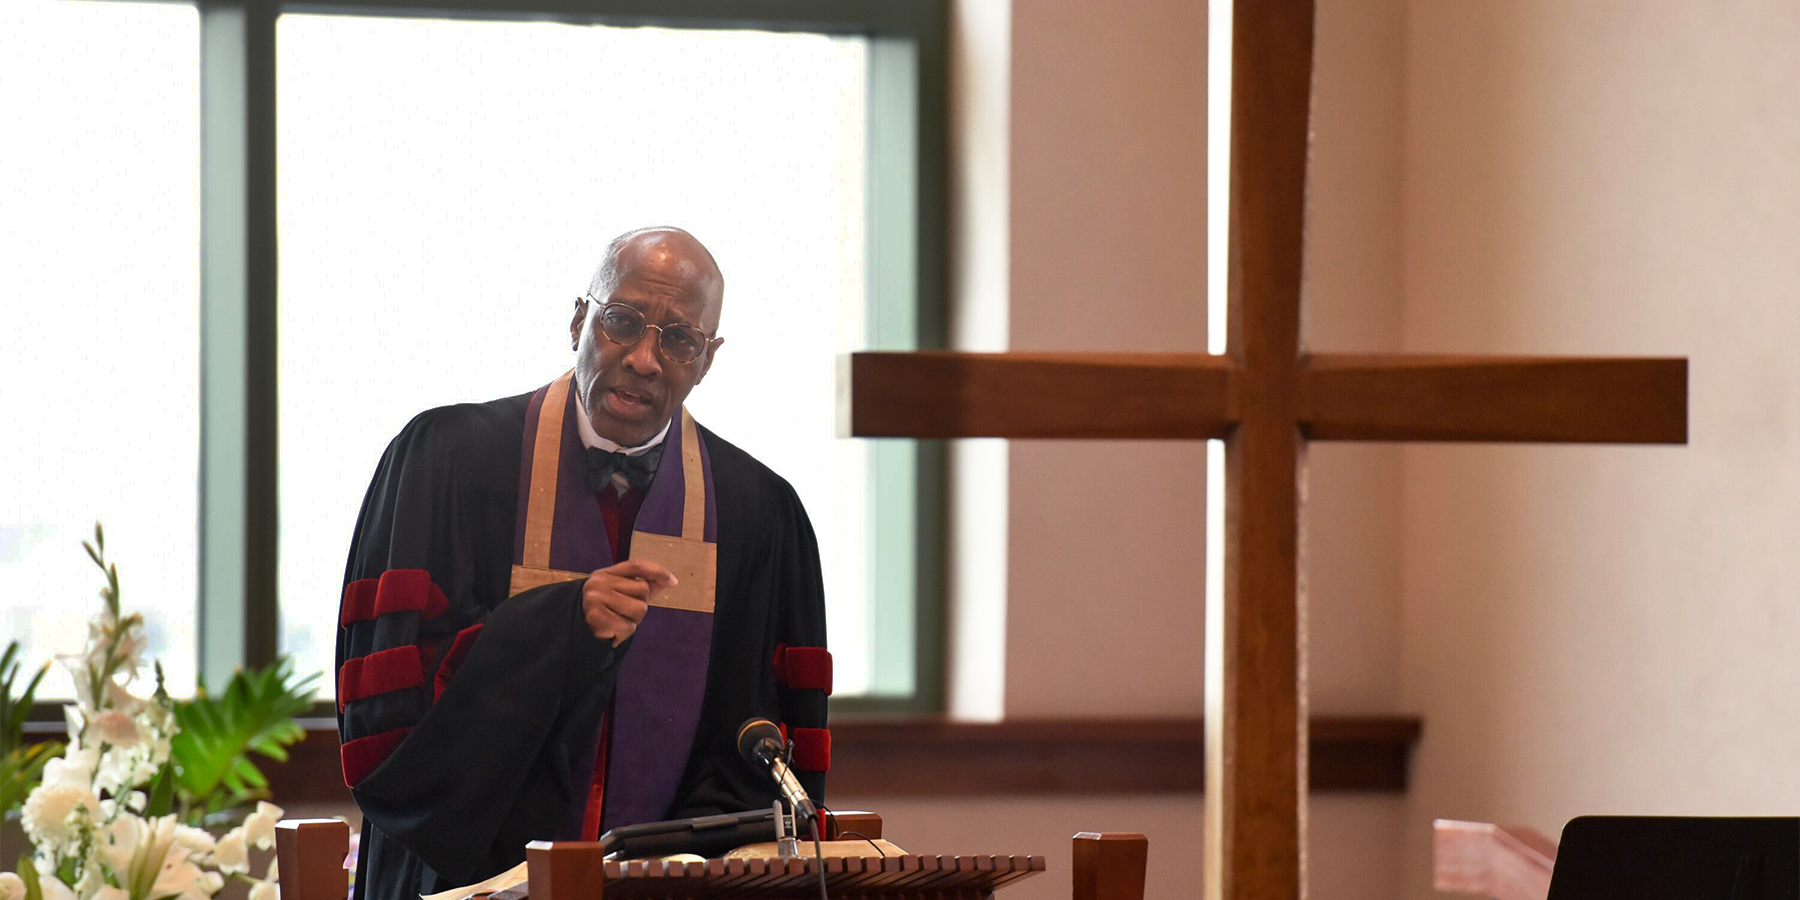 Rev. Dr. J. Herbert Nelson, II, shared his concerns regarding the cash bail system during chapel service at the Presbyterian Center in Louisville. Photo by Rich Copley.